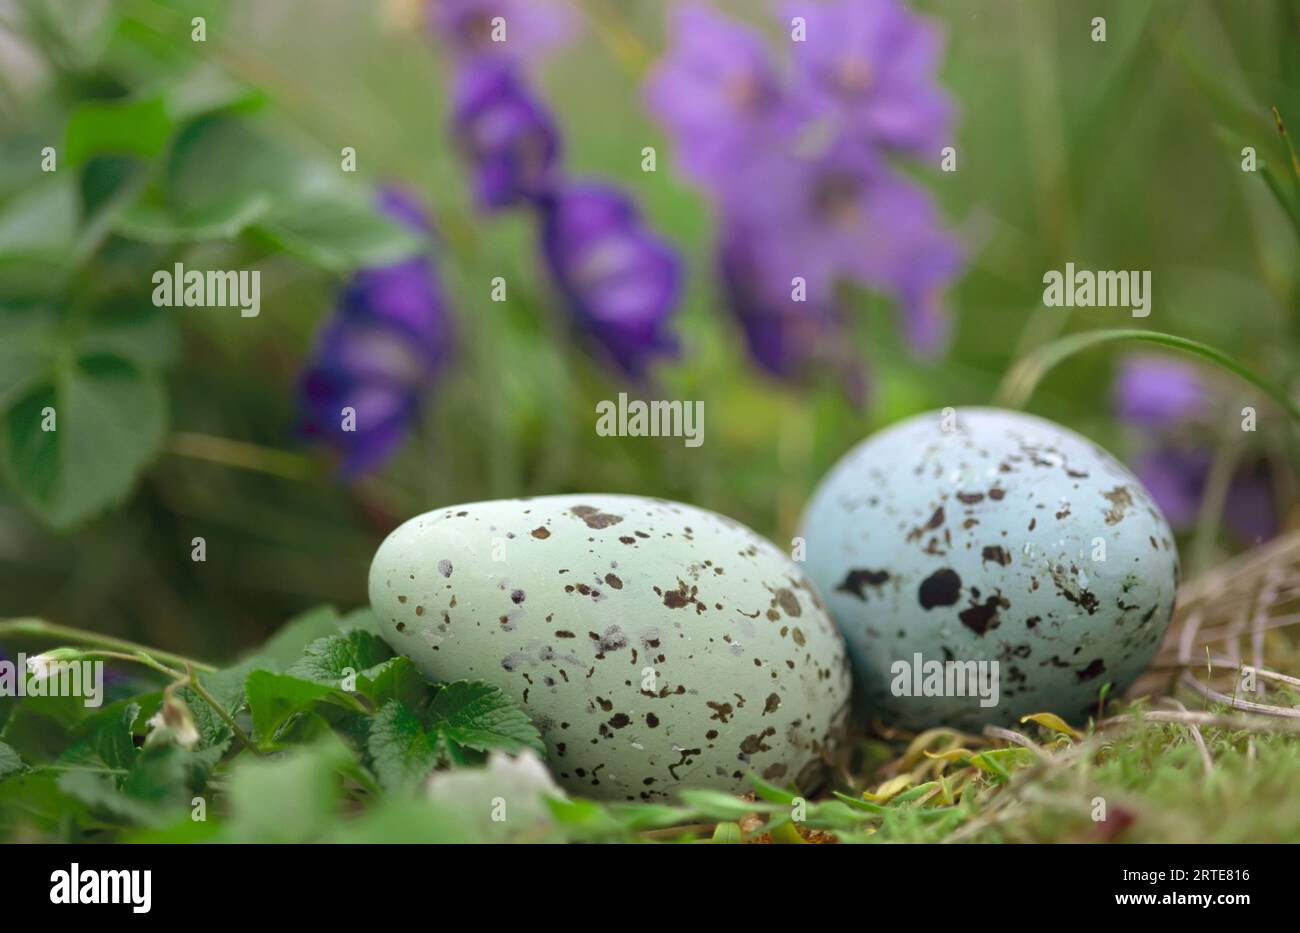 Speckled thick-billed murre's egg (Uria lomvia) nestled among purple wildflowers Stock Photo